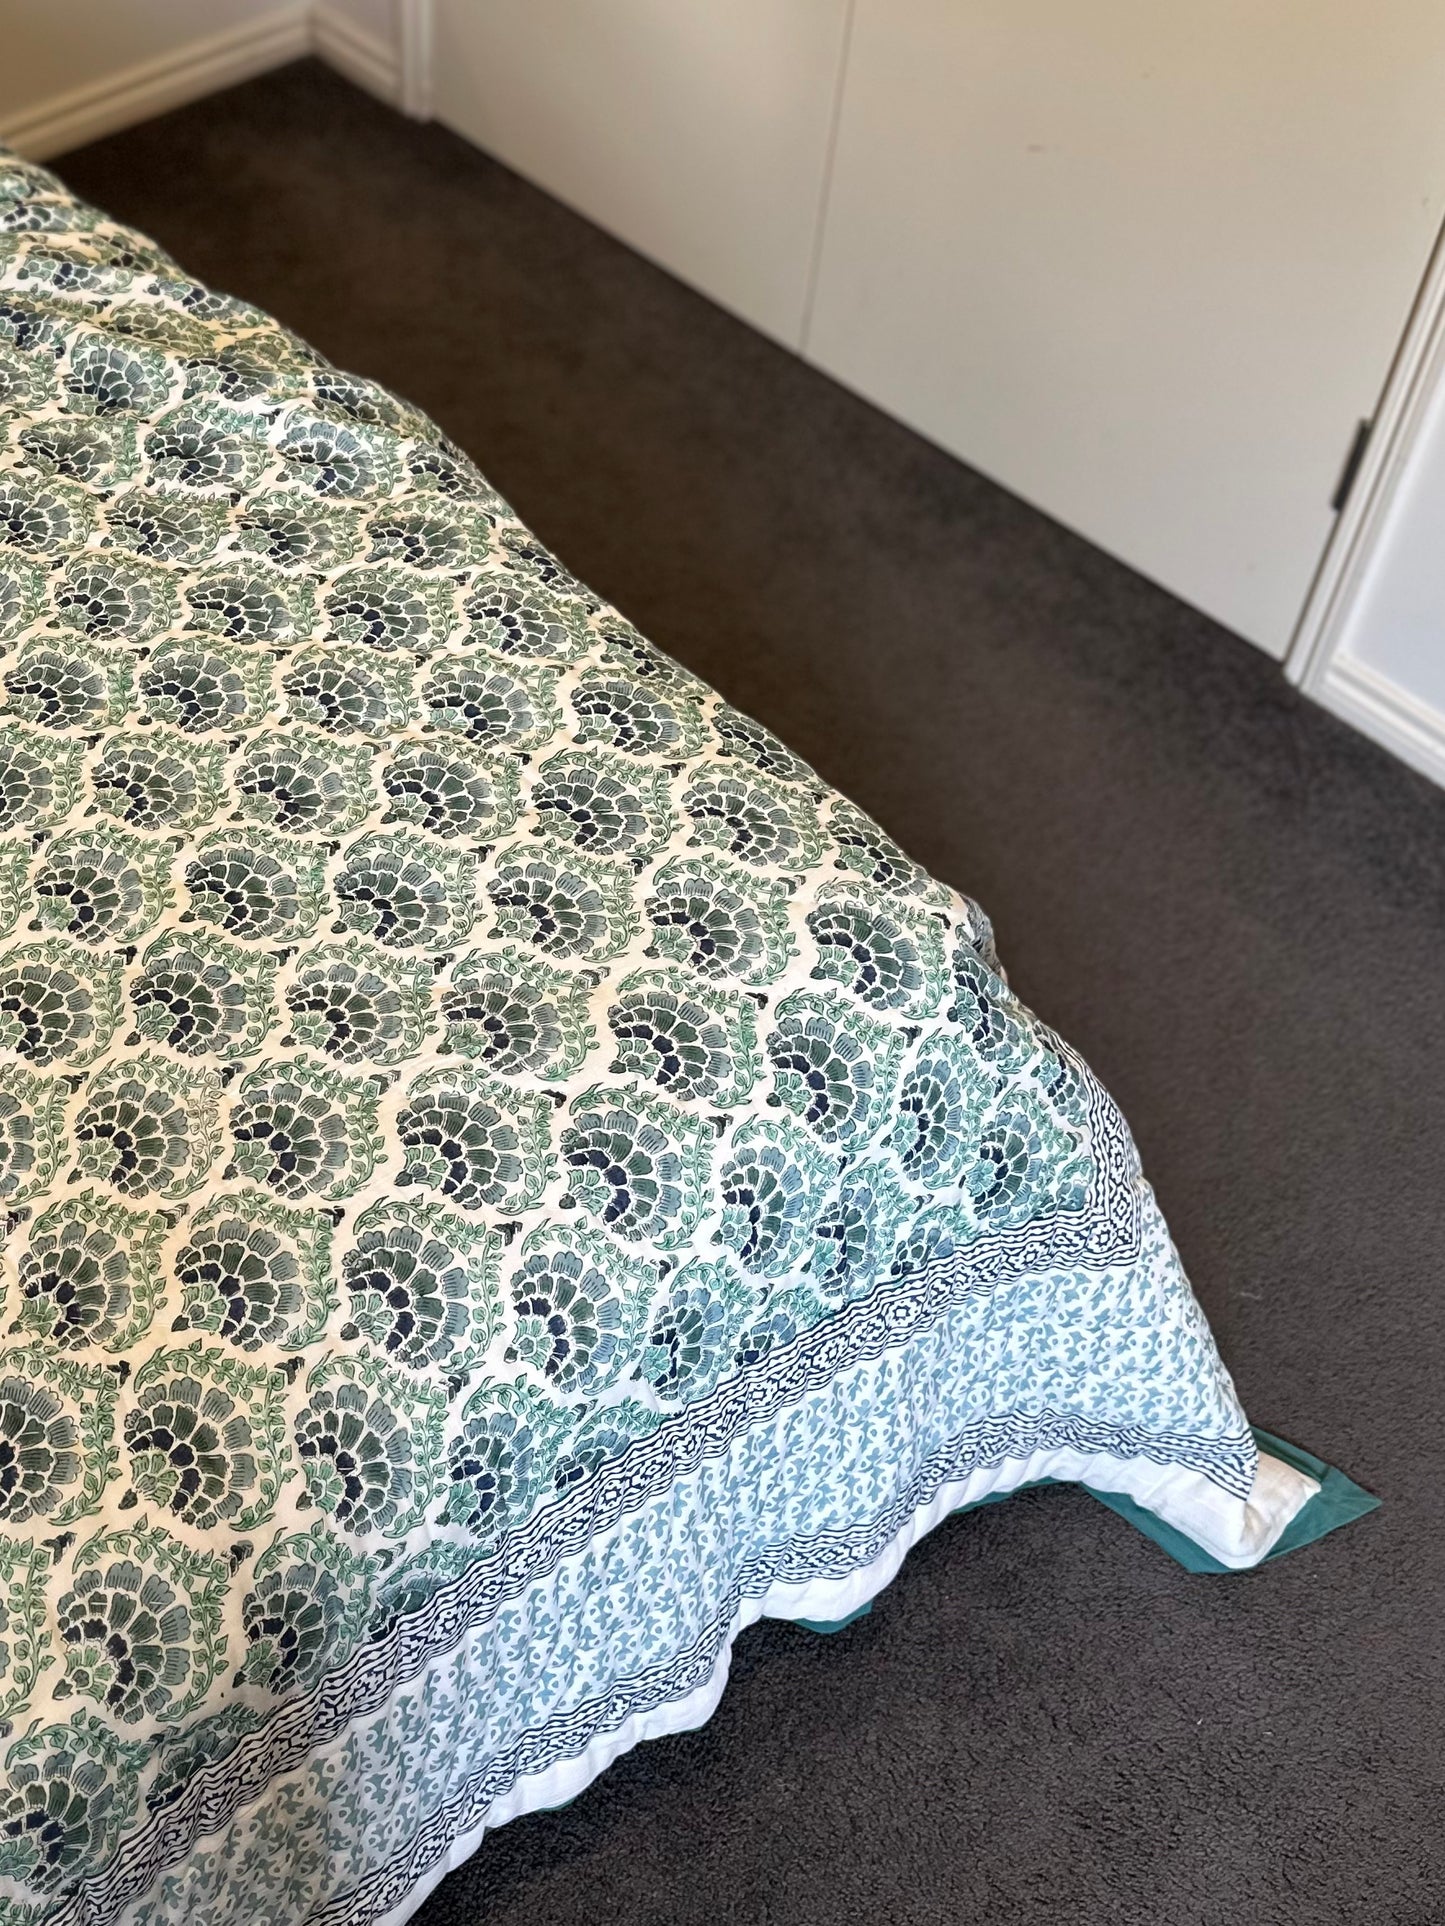 Block Printed Quilts - Queen Sized